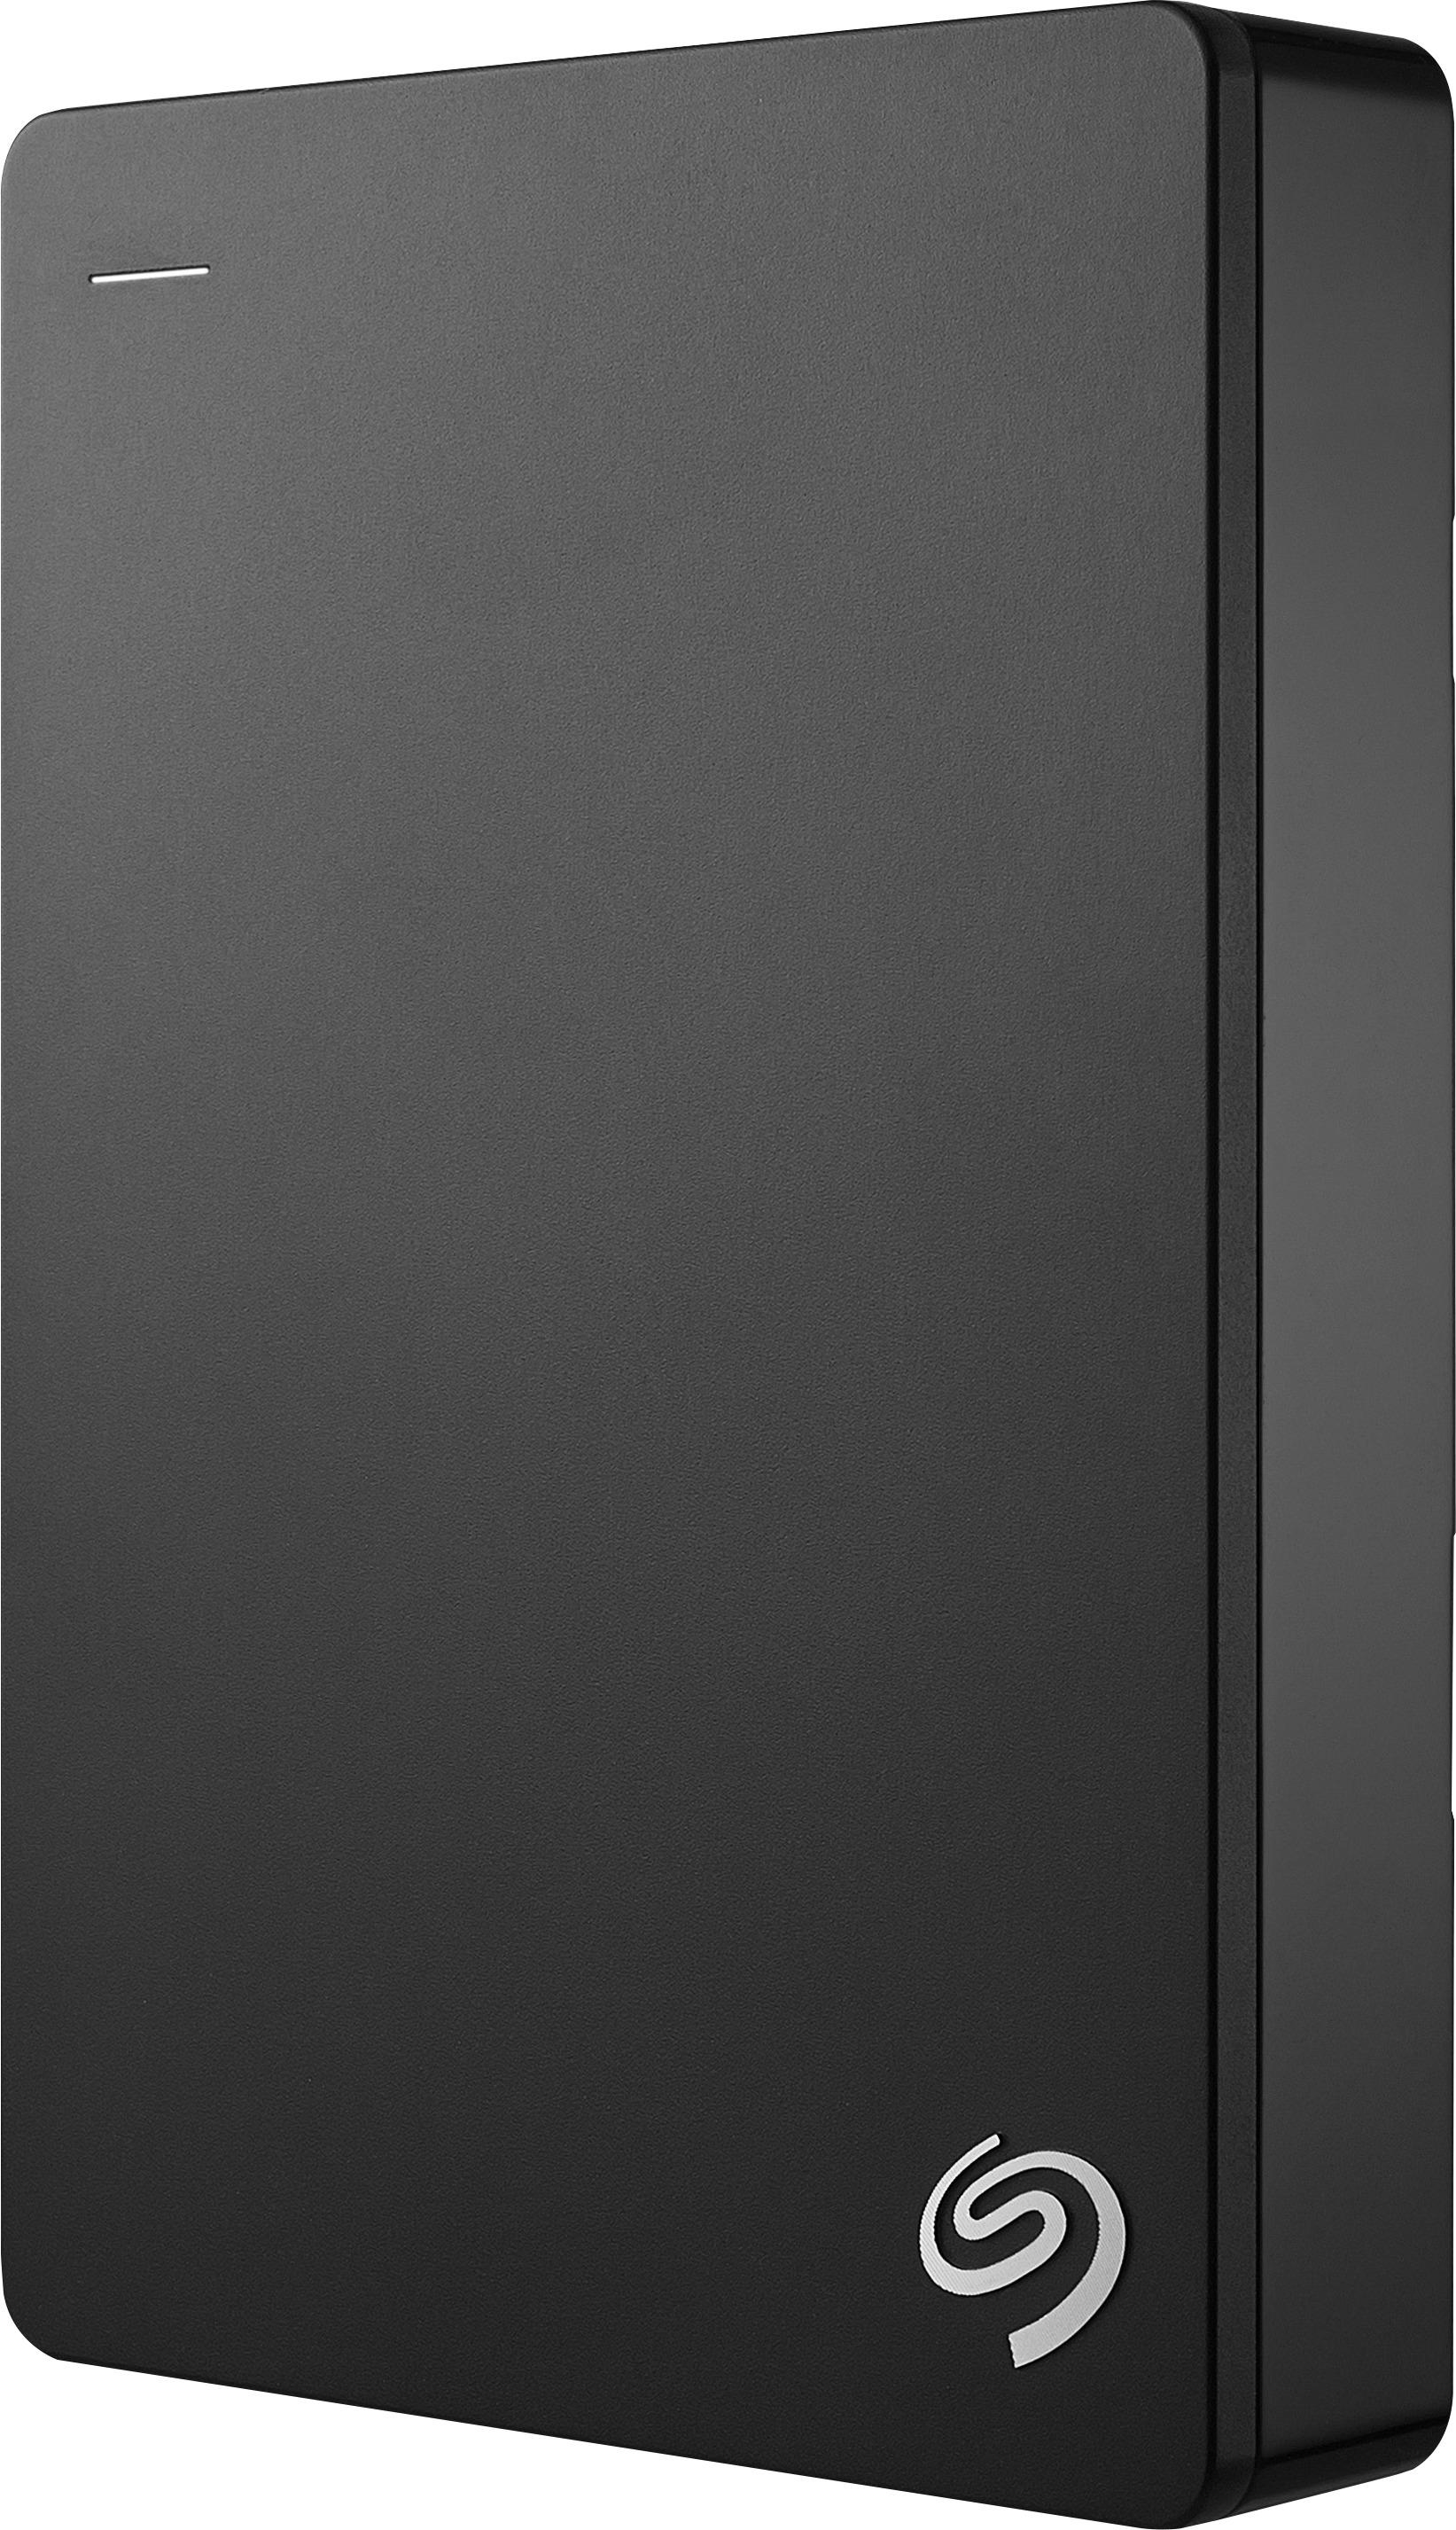 How to delete files on seagate backup drive on mac Seagate Backup Plus 4tb External Usb 3 0 2 0 Portable Hard Drive Black Stdr4000100 Best Buy